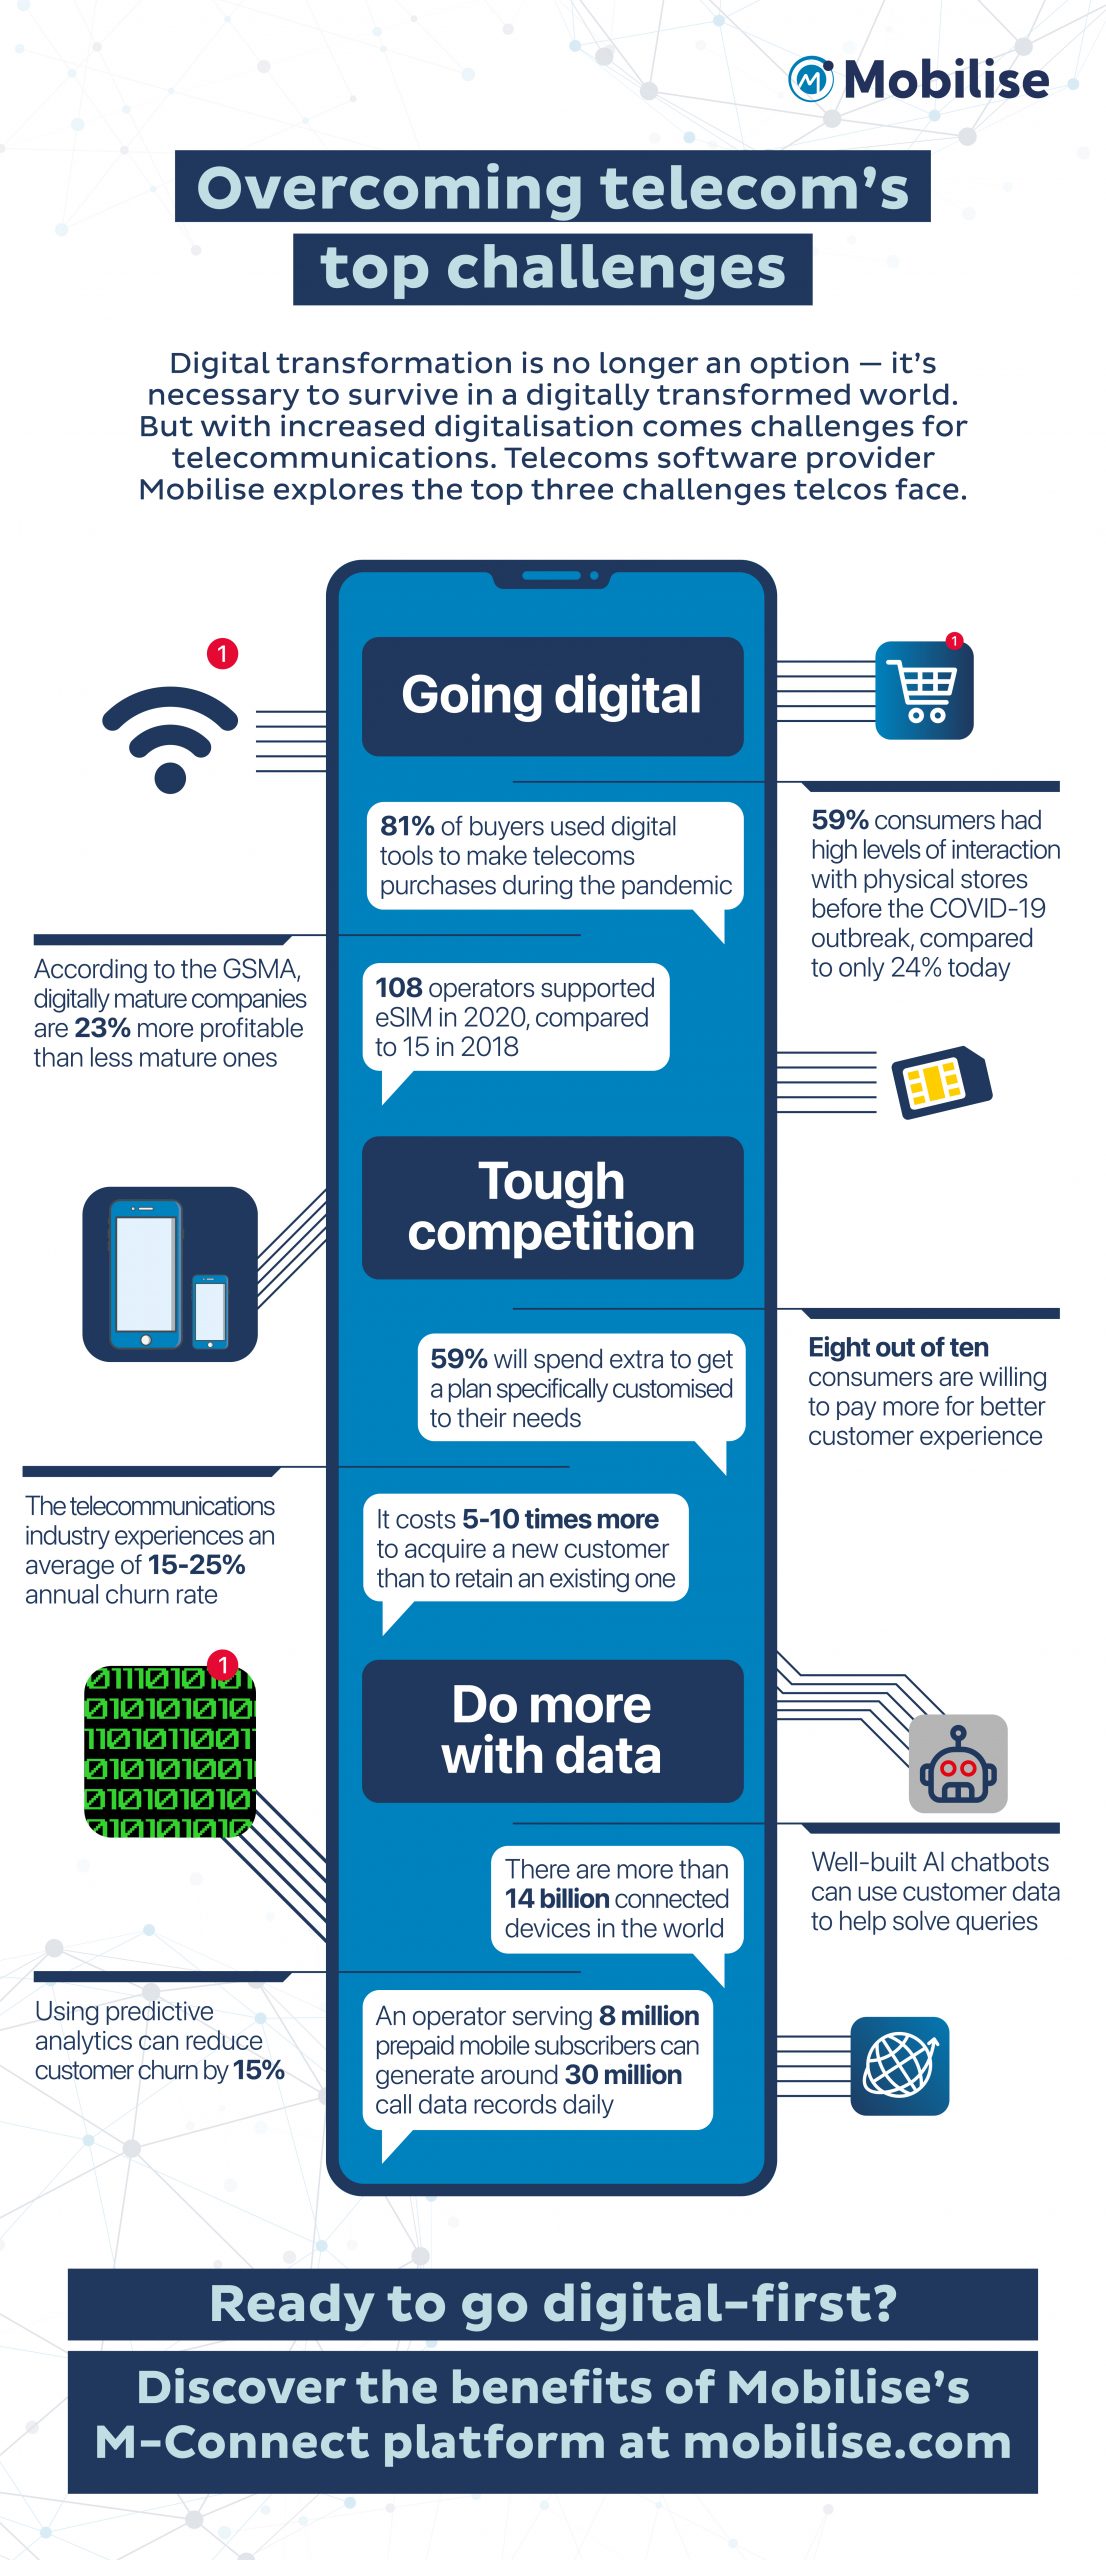 Infographic - challenges in the telecom indstry - digitalisation, competition, data